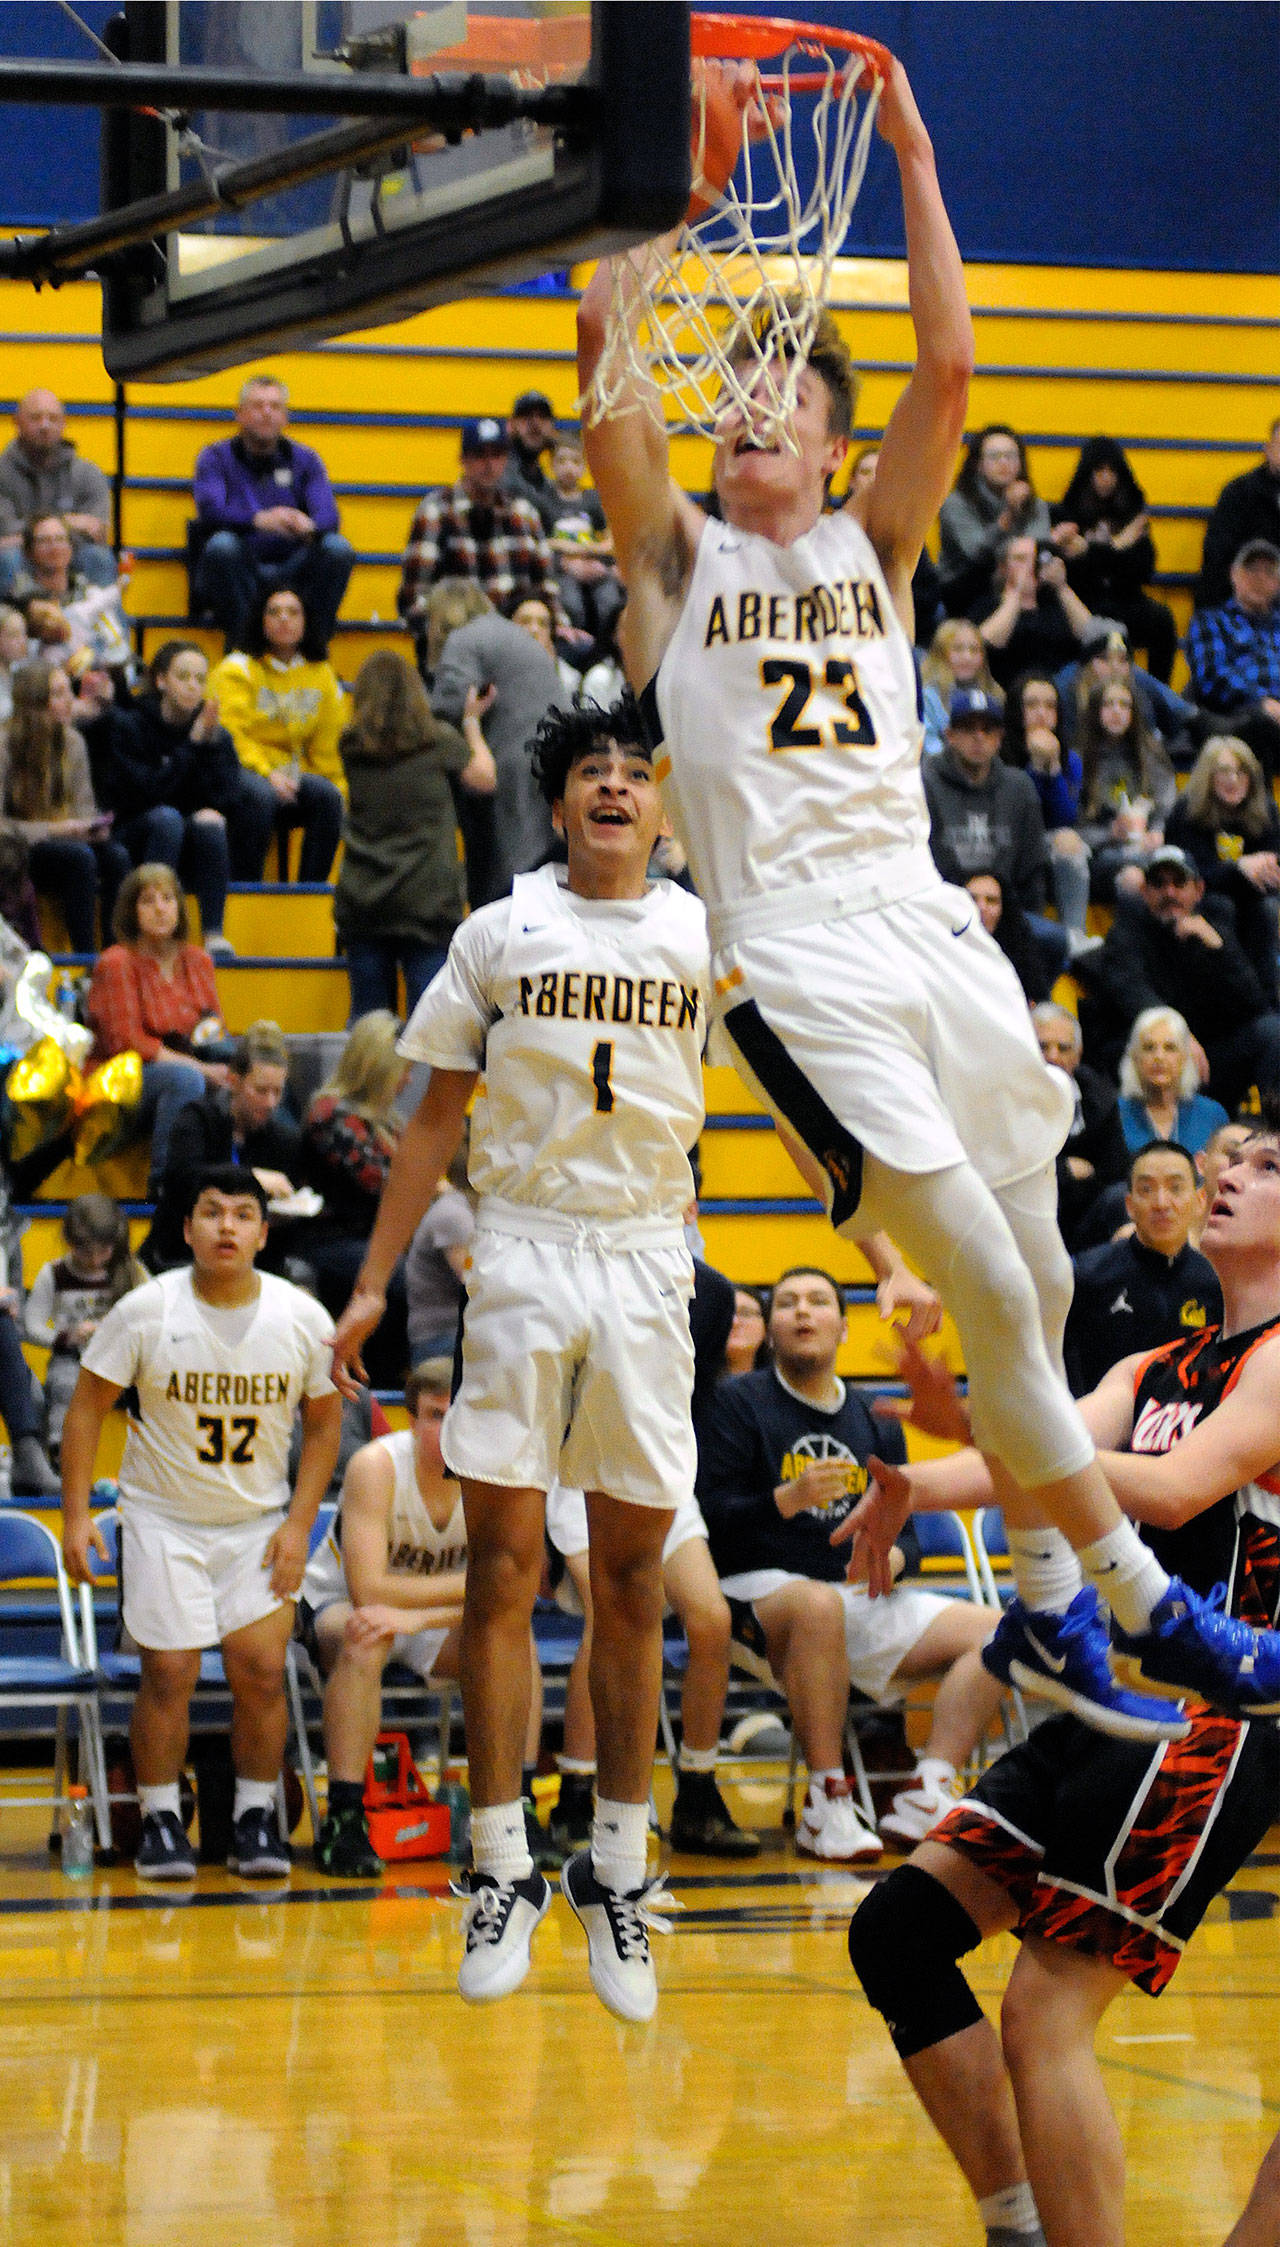 Aberdeen’s Wyatt Johnson throws down a slam dunk while teammate Angel Baltazar (1) looks on during the third quarter of Aberdeen’s 61-49 victory on Tuesday at Sam Benn Gym in Aberdeen. (Ryan Sparks | Grays Harbor News Group)